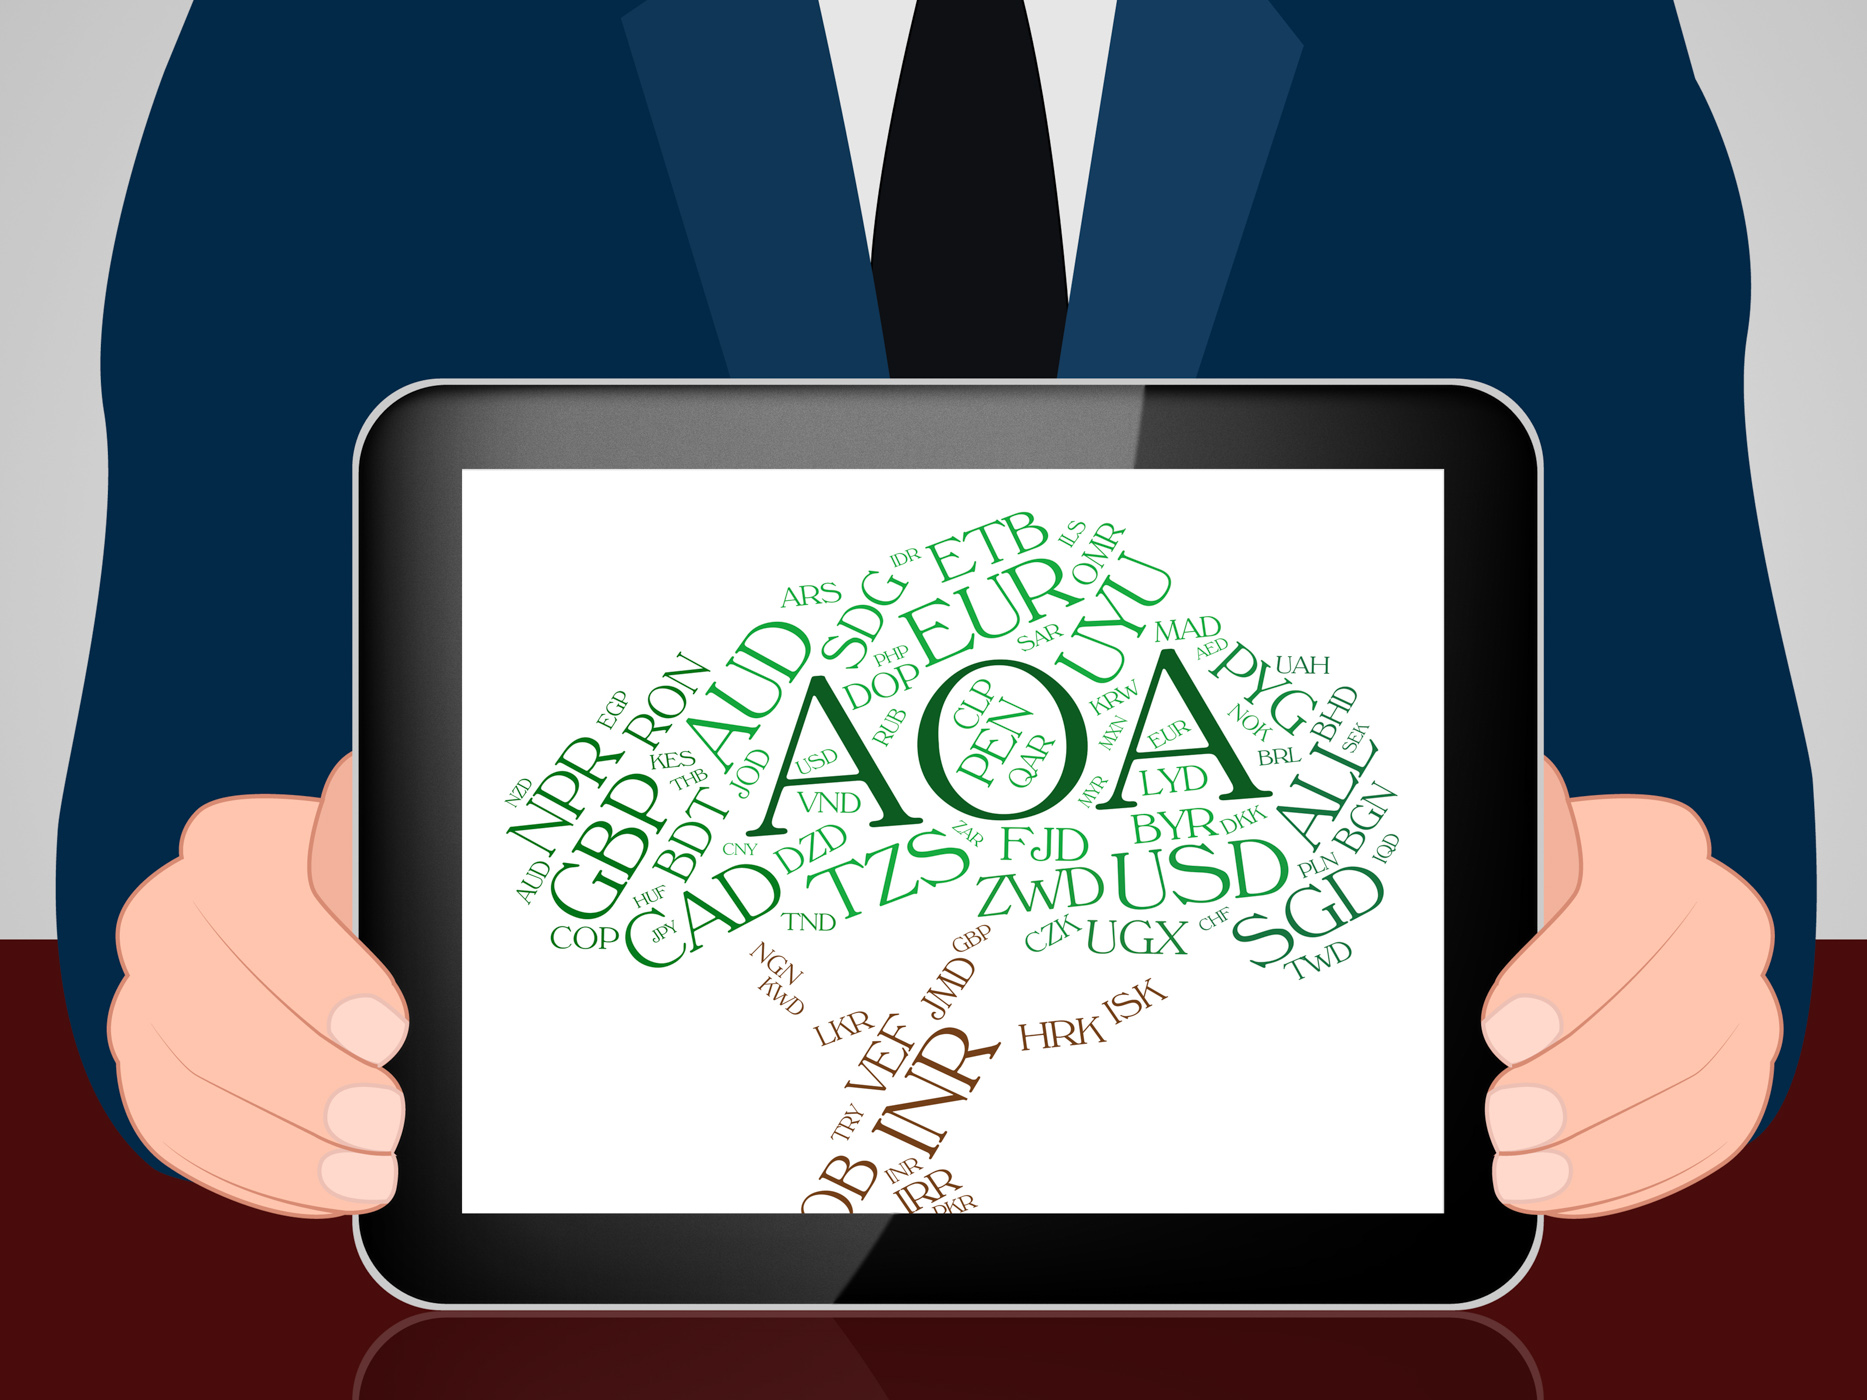 Aoa currency indicates exchange rate and coin photo